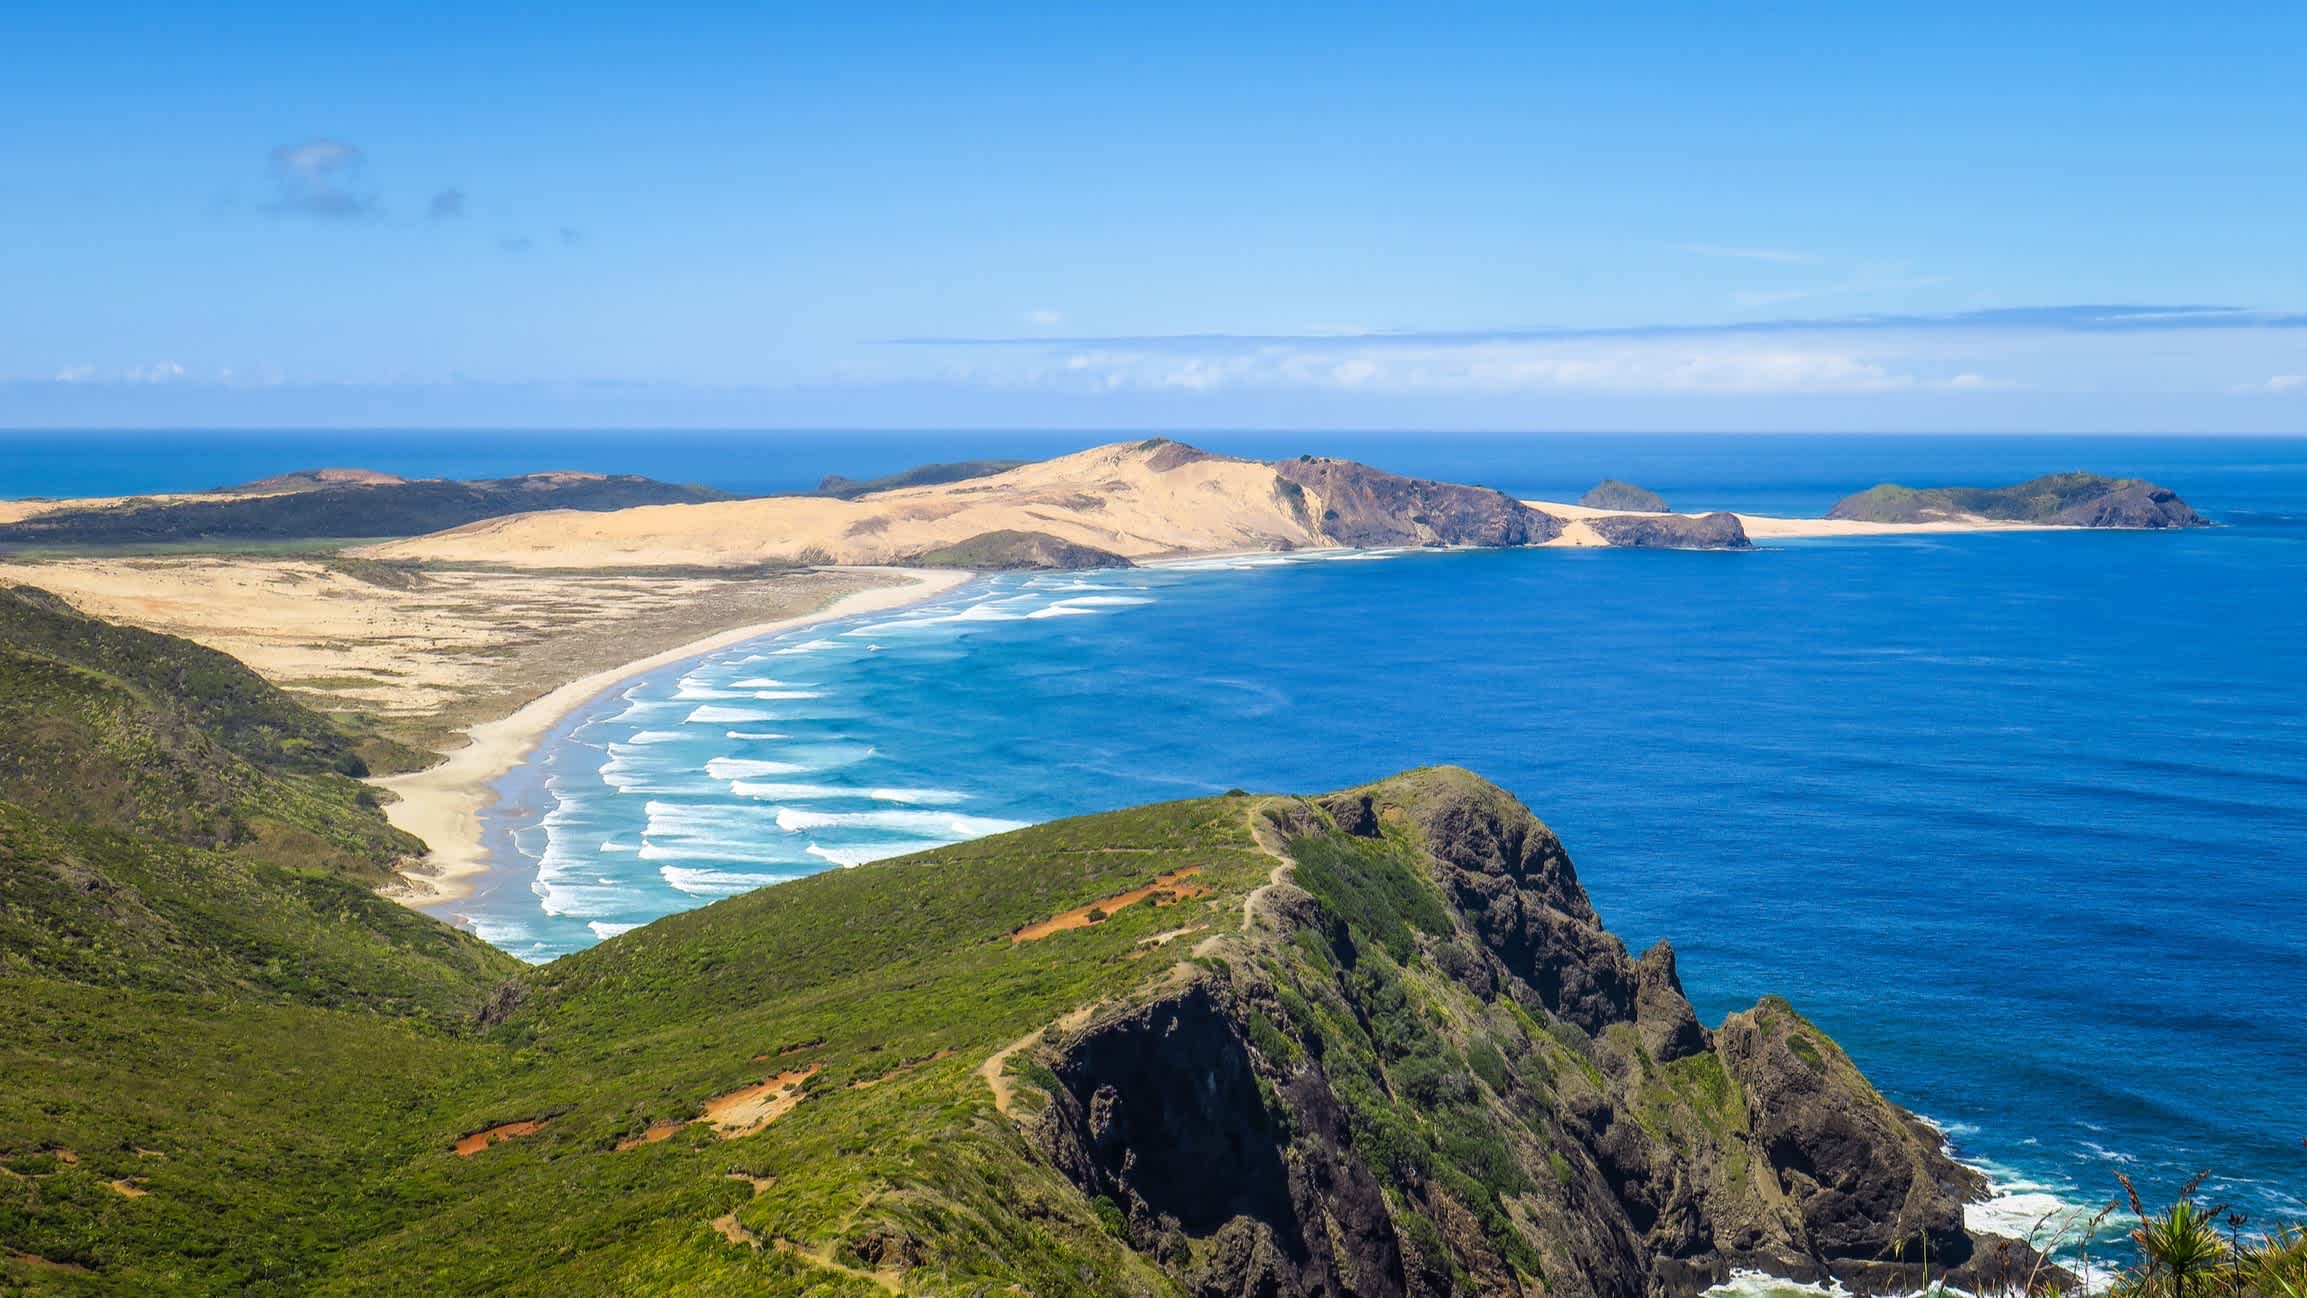 Aerial view of green cliffs, sand dunes and blue water of Ninety Mile Beach, Cape Reinga, New Zealand
